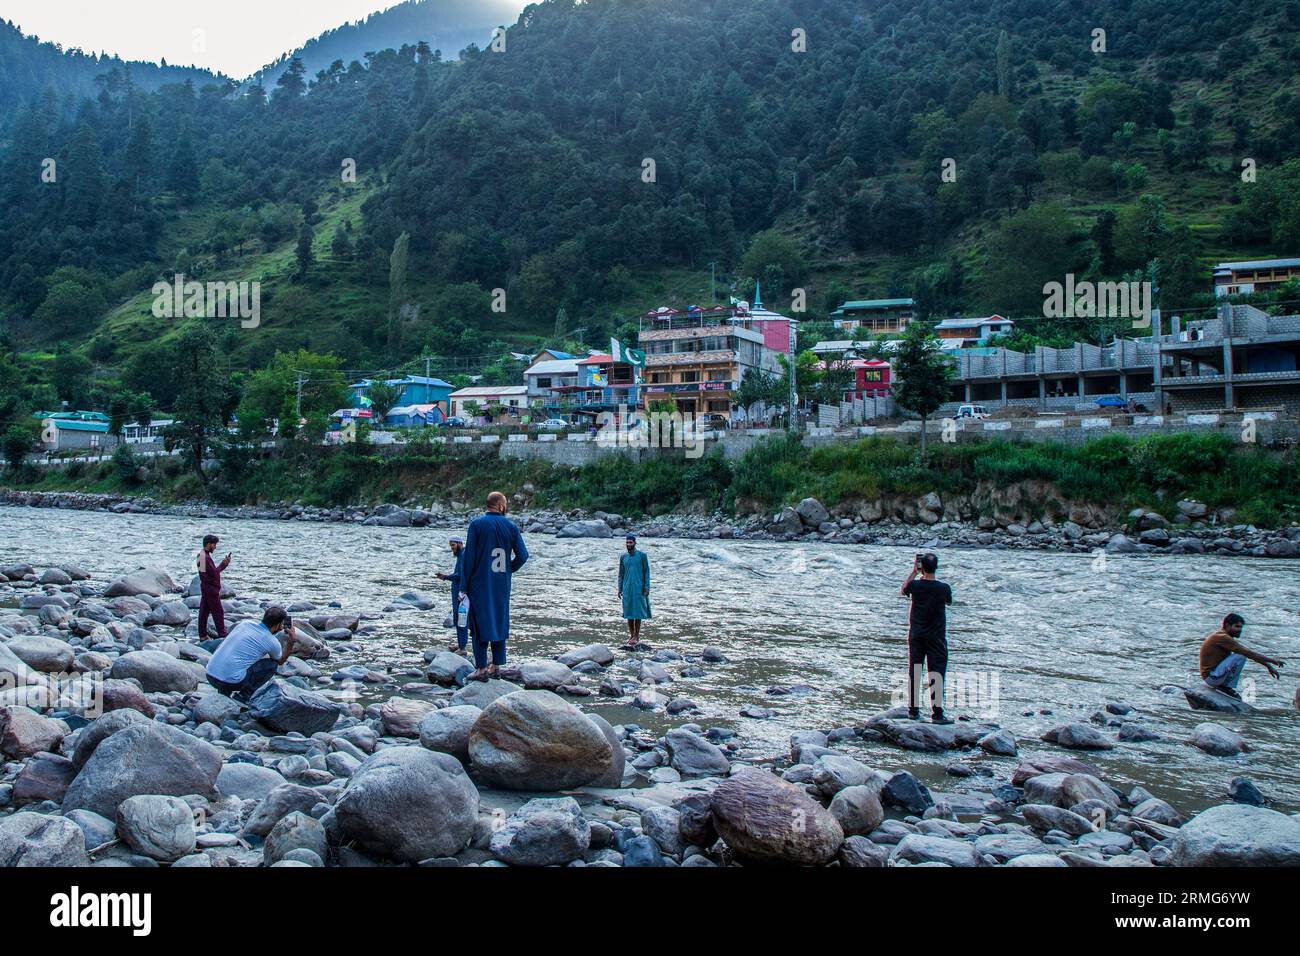 Keran Kupwara, India. 24th Aug, 2023. People are seen filming and enjoying view of Pakistan administered Kashmir on the banks of Neelam river or Kishan Ganga that has divided Kashmir into two parts controlled by nuclear rivals India and Pakistan. The river acts as a disputed line of control and flows through a village called Keran from both sides which is located on the northern side of Indian Kashmir's Border district Kupwara some 150kms from Srinagar and 93kms from Muzaffarabad, in the Pakistan side of Kashmir. (Photo by Faisal Bashir/SOPA Images/Sipa USA) Credit: Sipa USA/Alamy Live News Stock Photo